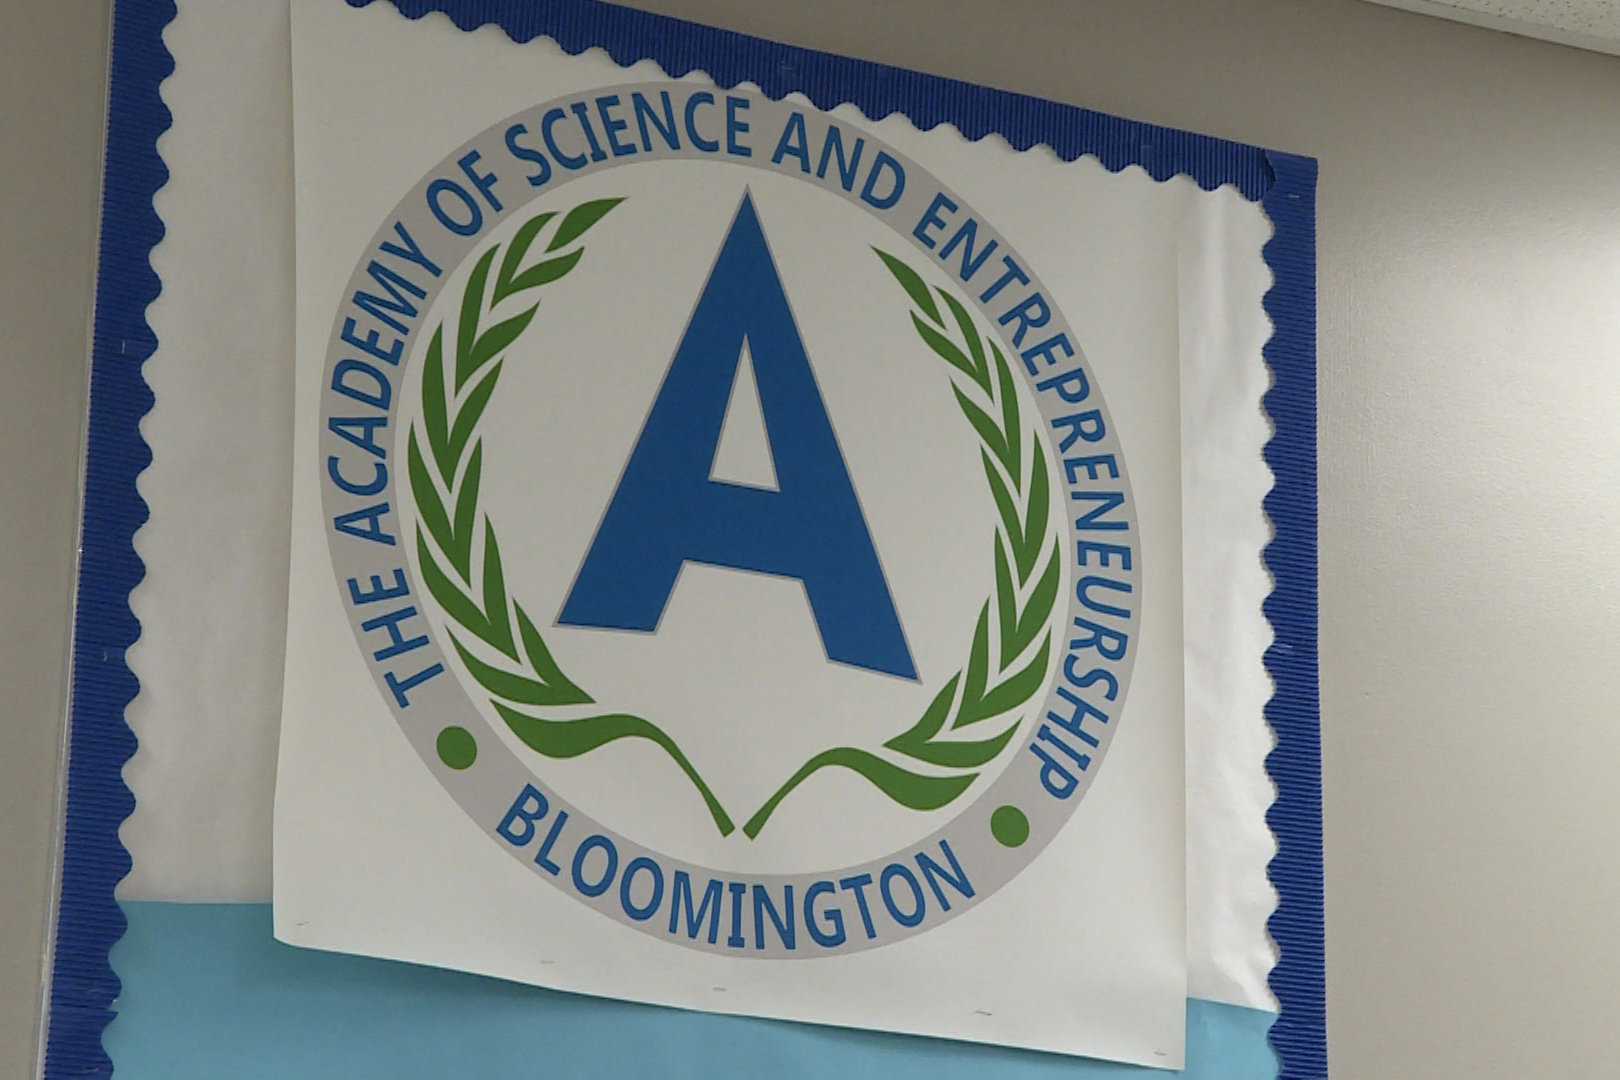 The sign for the Academy of Science and Entrepreneurship in Bloomington